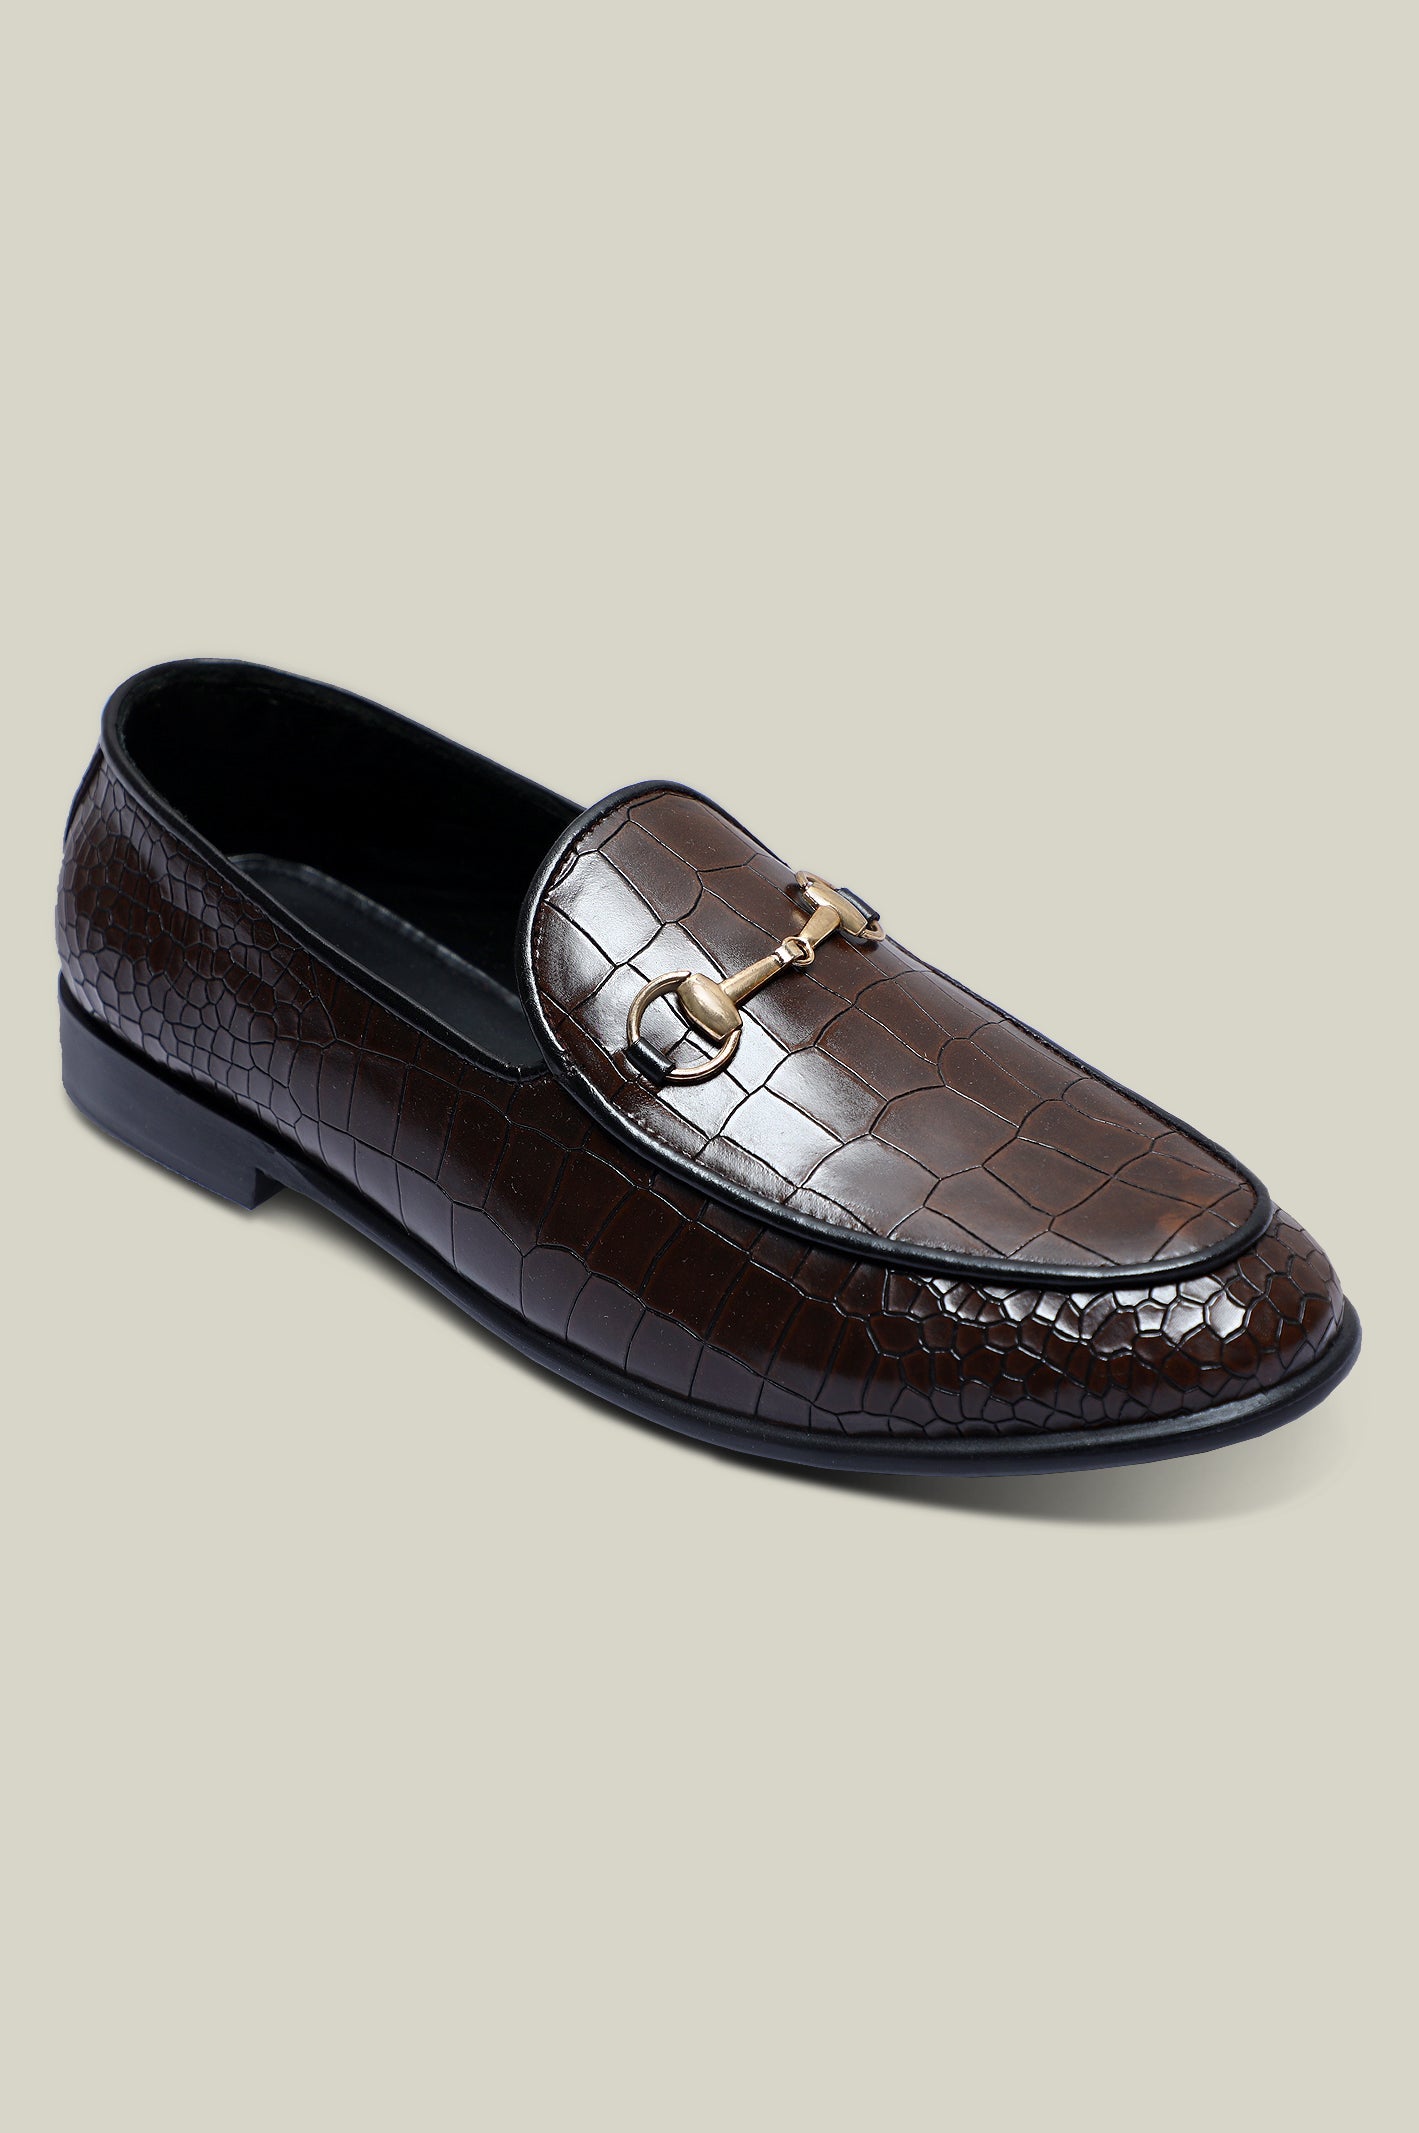 Formal Shoes For Men - Diners